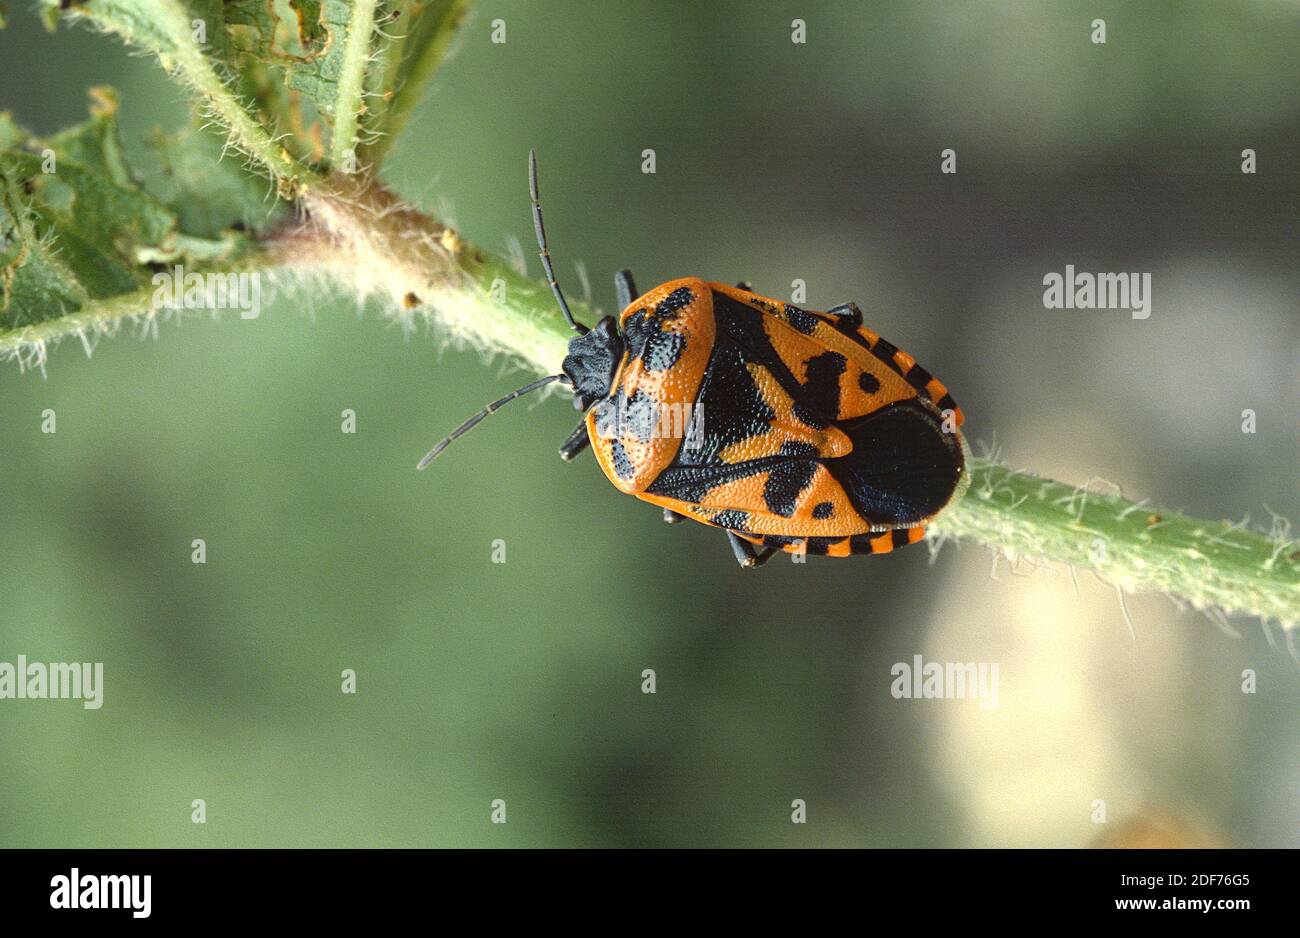 Shield bug (Eurydema ventralis) is an hemiptera insect native to Europe. Stock Photo